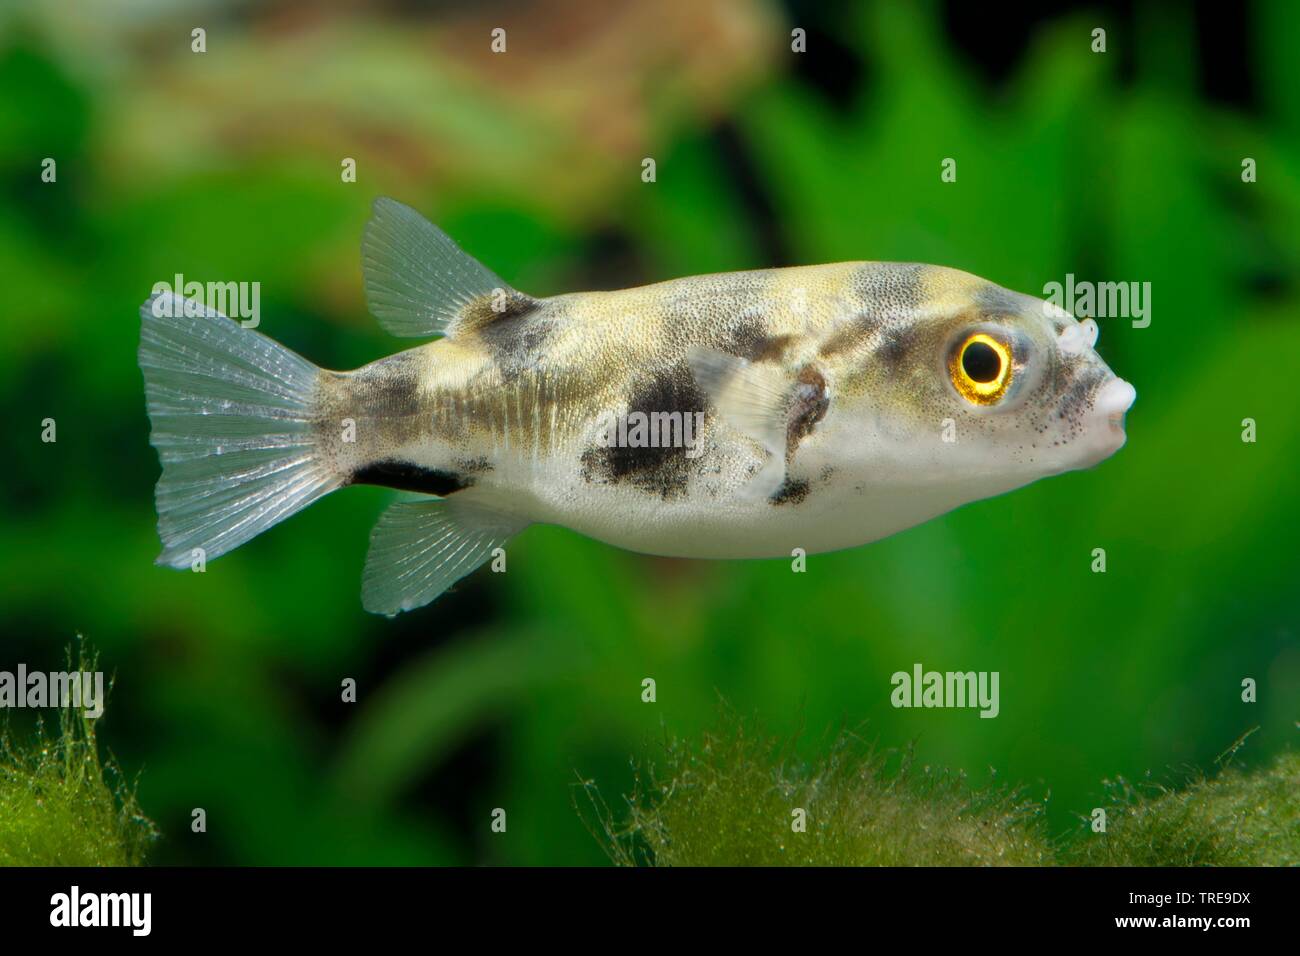 Amazon puffer, asellus puffer, South American freshwater puffer, Peruvian puffer (Colomesus asellus, Chelychthis asellus), swimming, side view Stock Photo